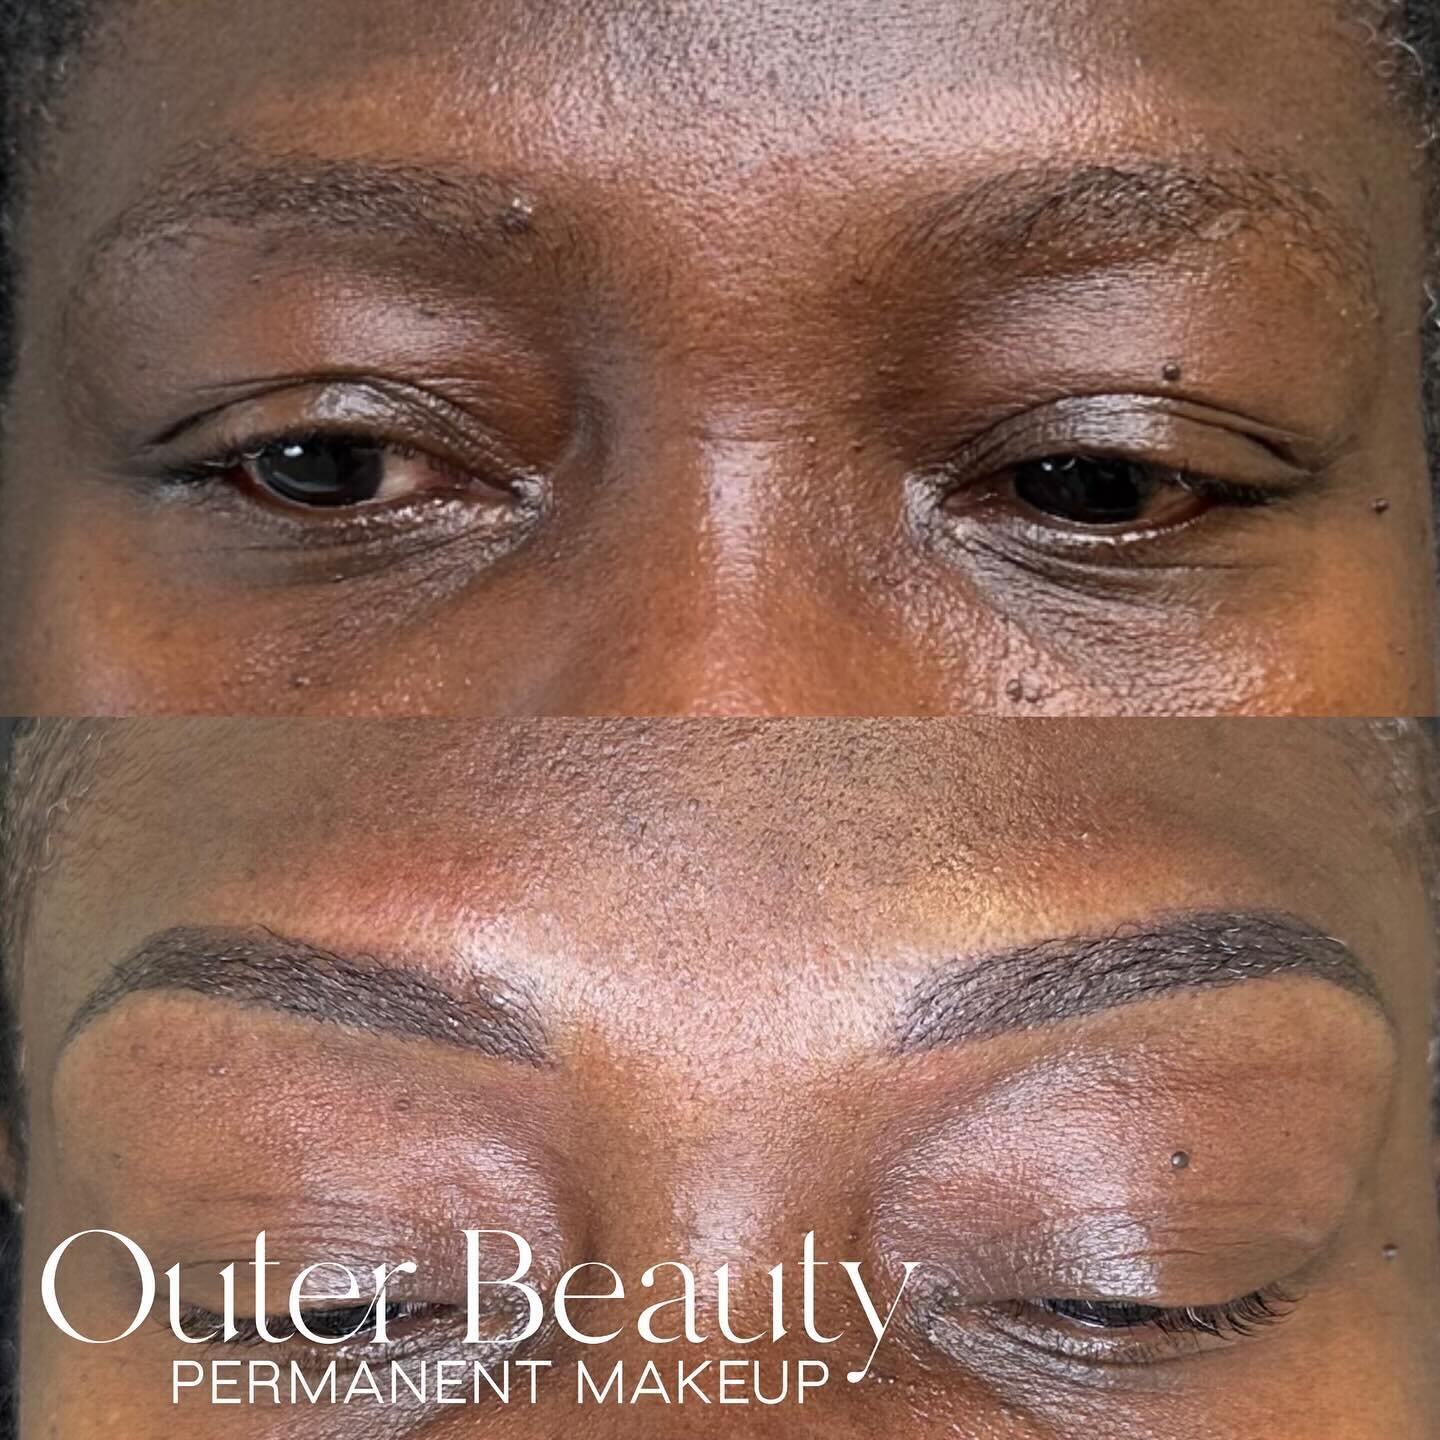 In love with these ombr&eacute; brows! 

&ldquo;What if I have a mole on my brow?&rdquo; We tattoo around it! 
One of the main indicators that a mole has turned cancerous is a change in color and size and tattoo ink can make this harder to detect. Mo